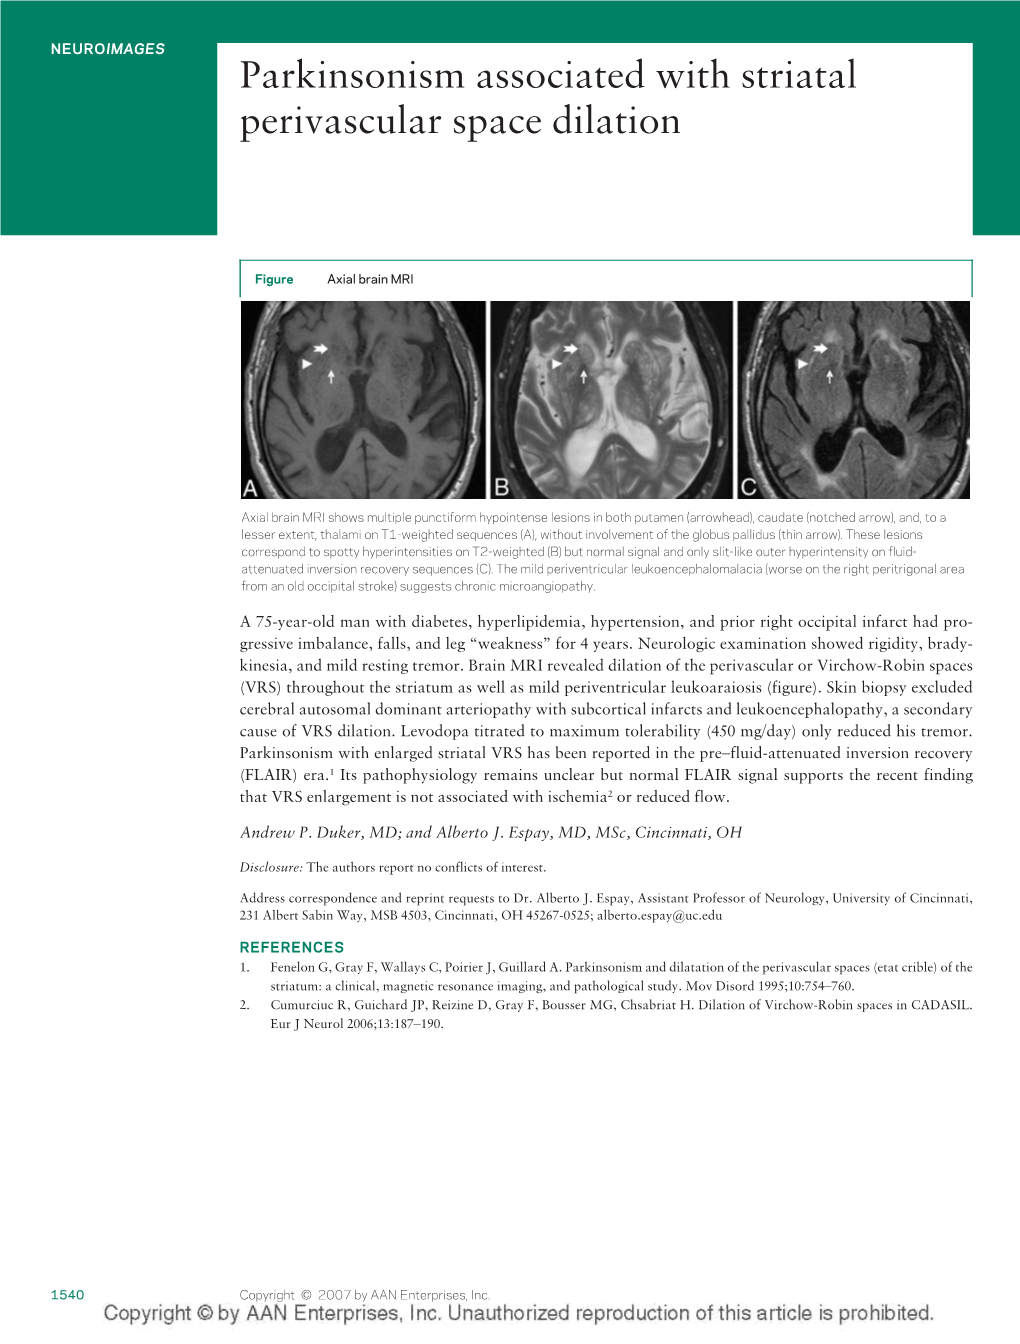 Parkinsonism Associated with Striatal Perivascular Space Dilation